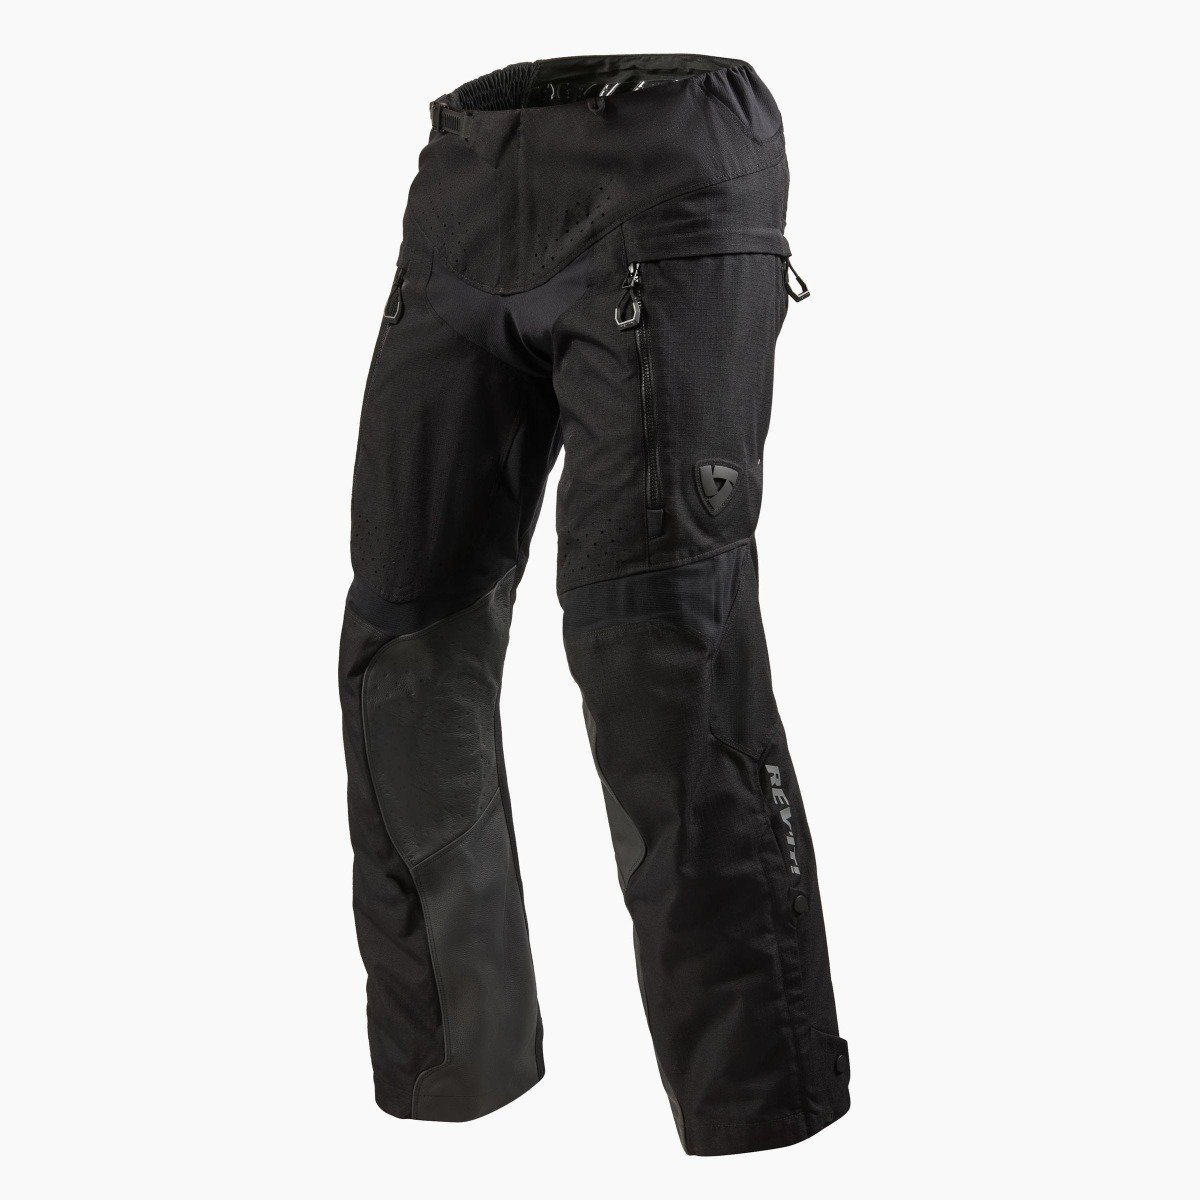 Image of REV'IT! Continent Short Black Motorcycle Pants Size XYL ID 8700001297127